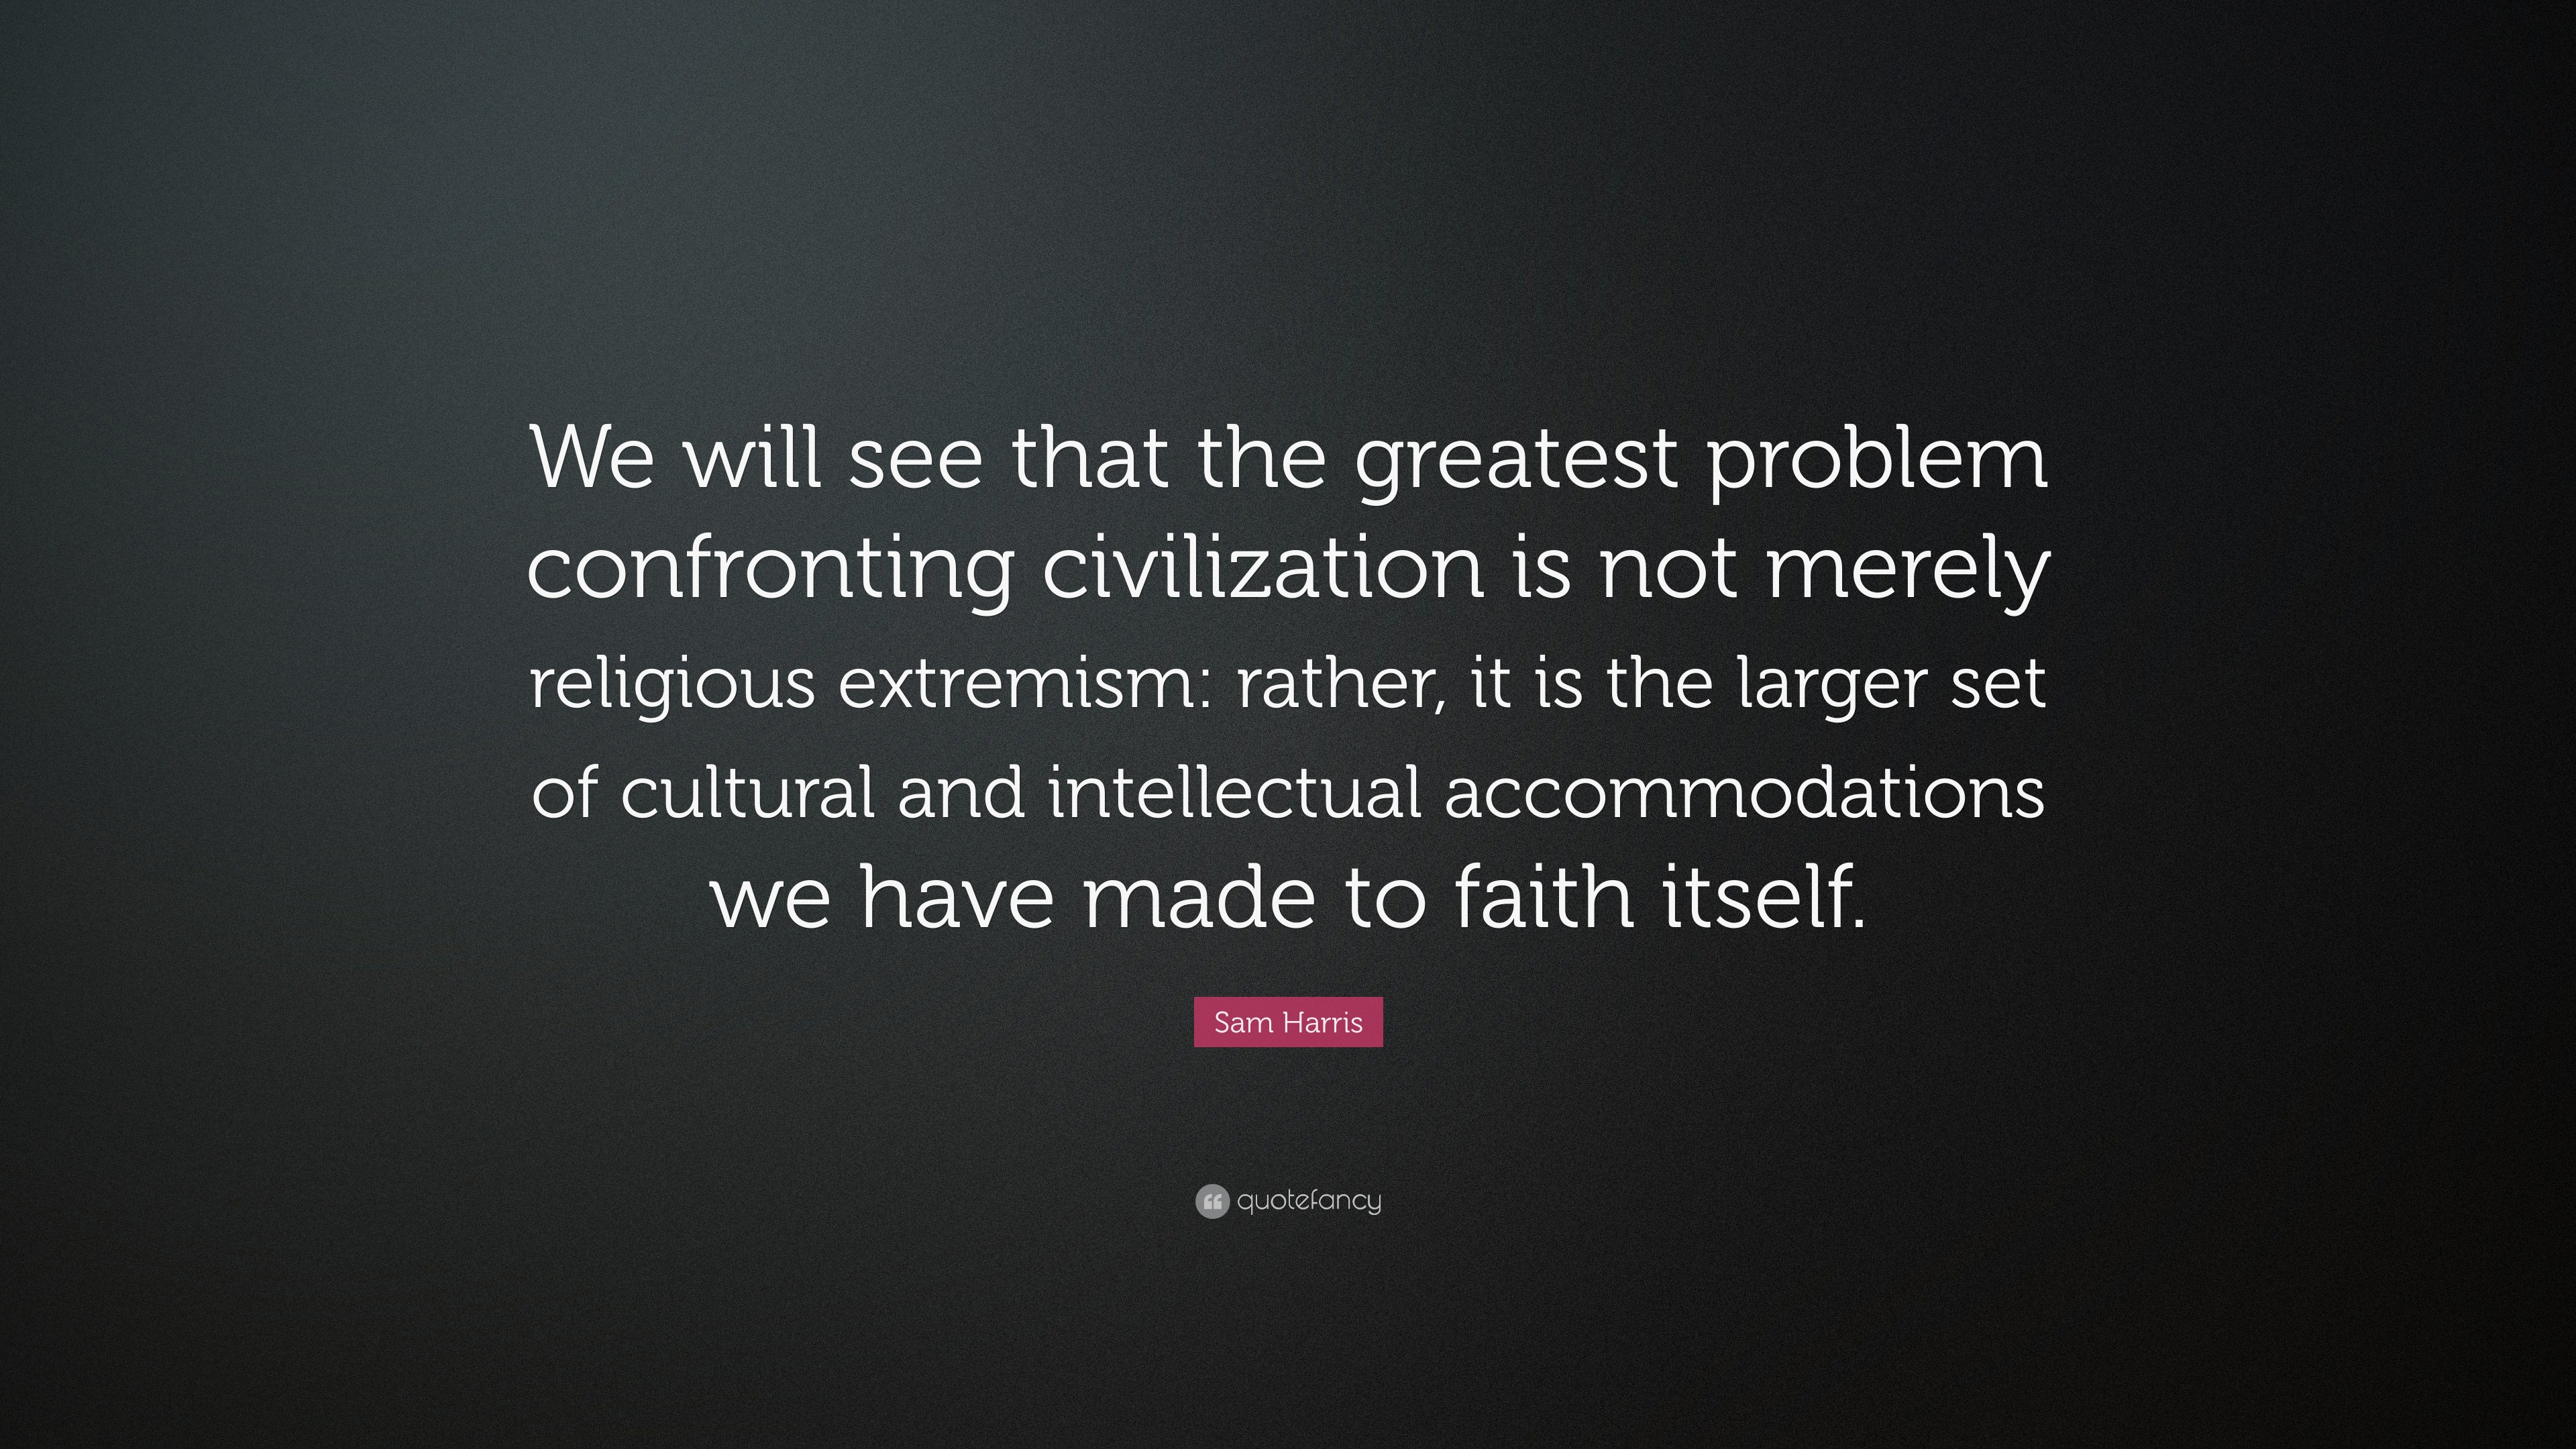 Sam Harris Quote We Will See That The Greatest Problem Confronting Civilization Is Not Merely Religious Extremism Rather It Is The Larg 7 Wallpapers Quotefancy